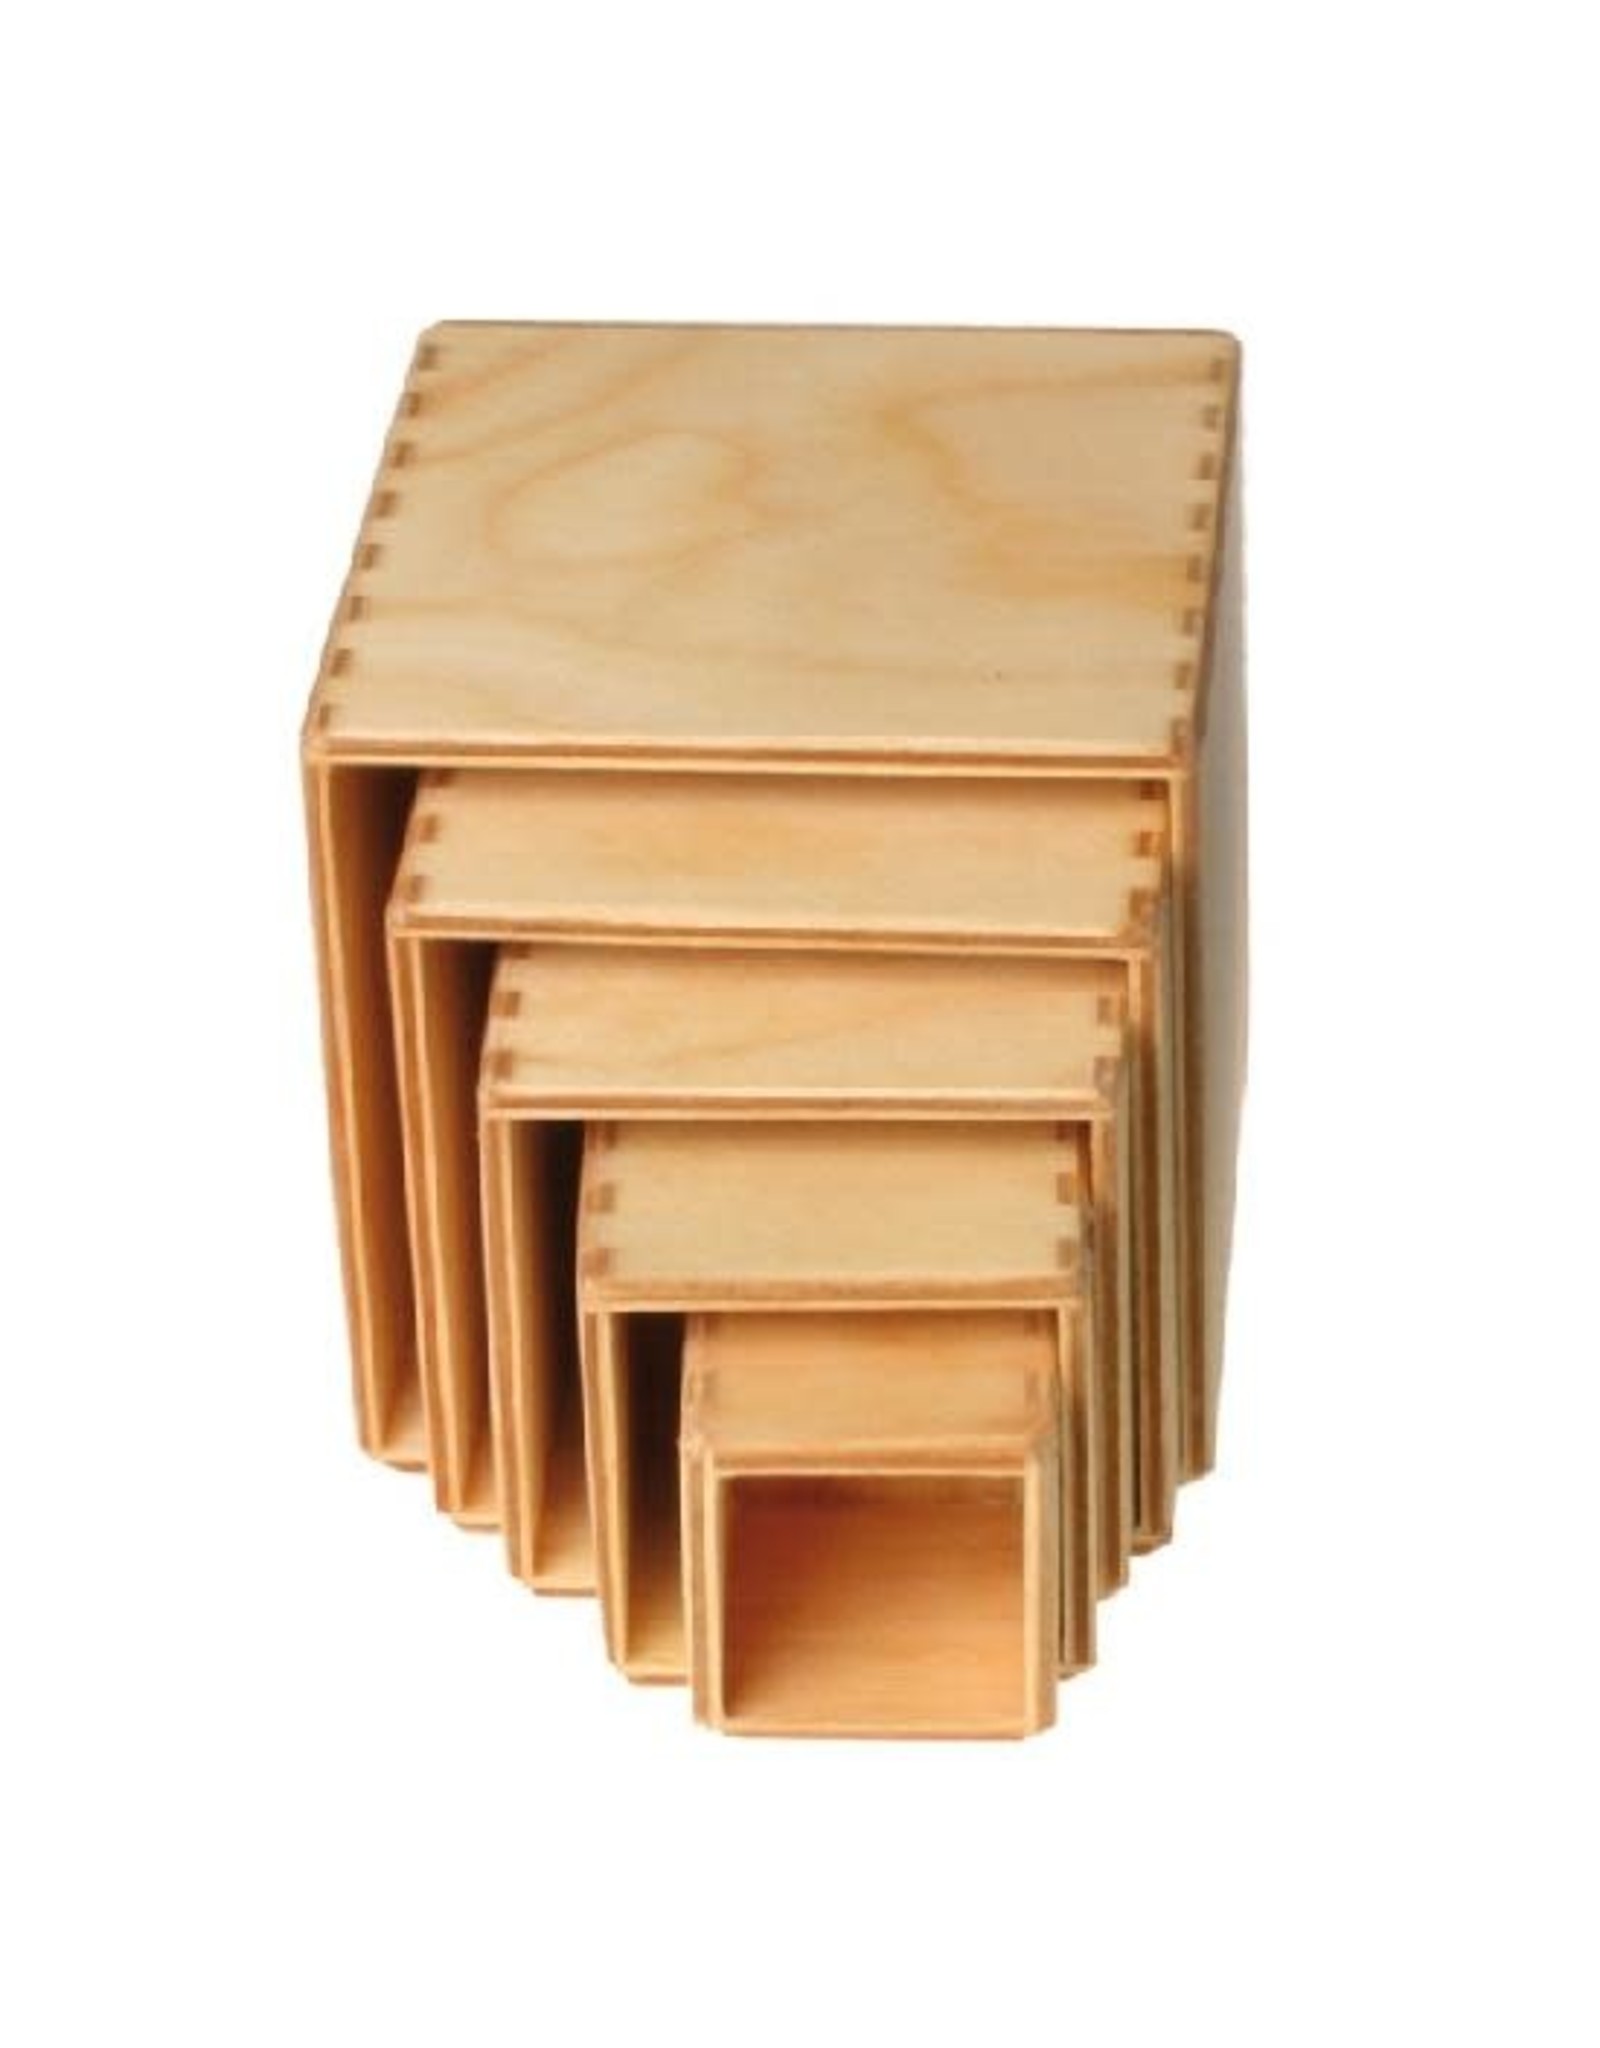 Grimm's Spiel & Holz Design Small Stacking Boxes Natural